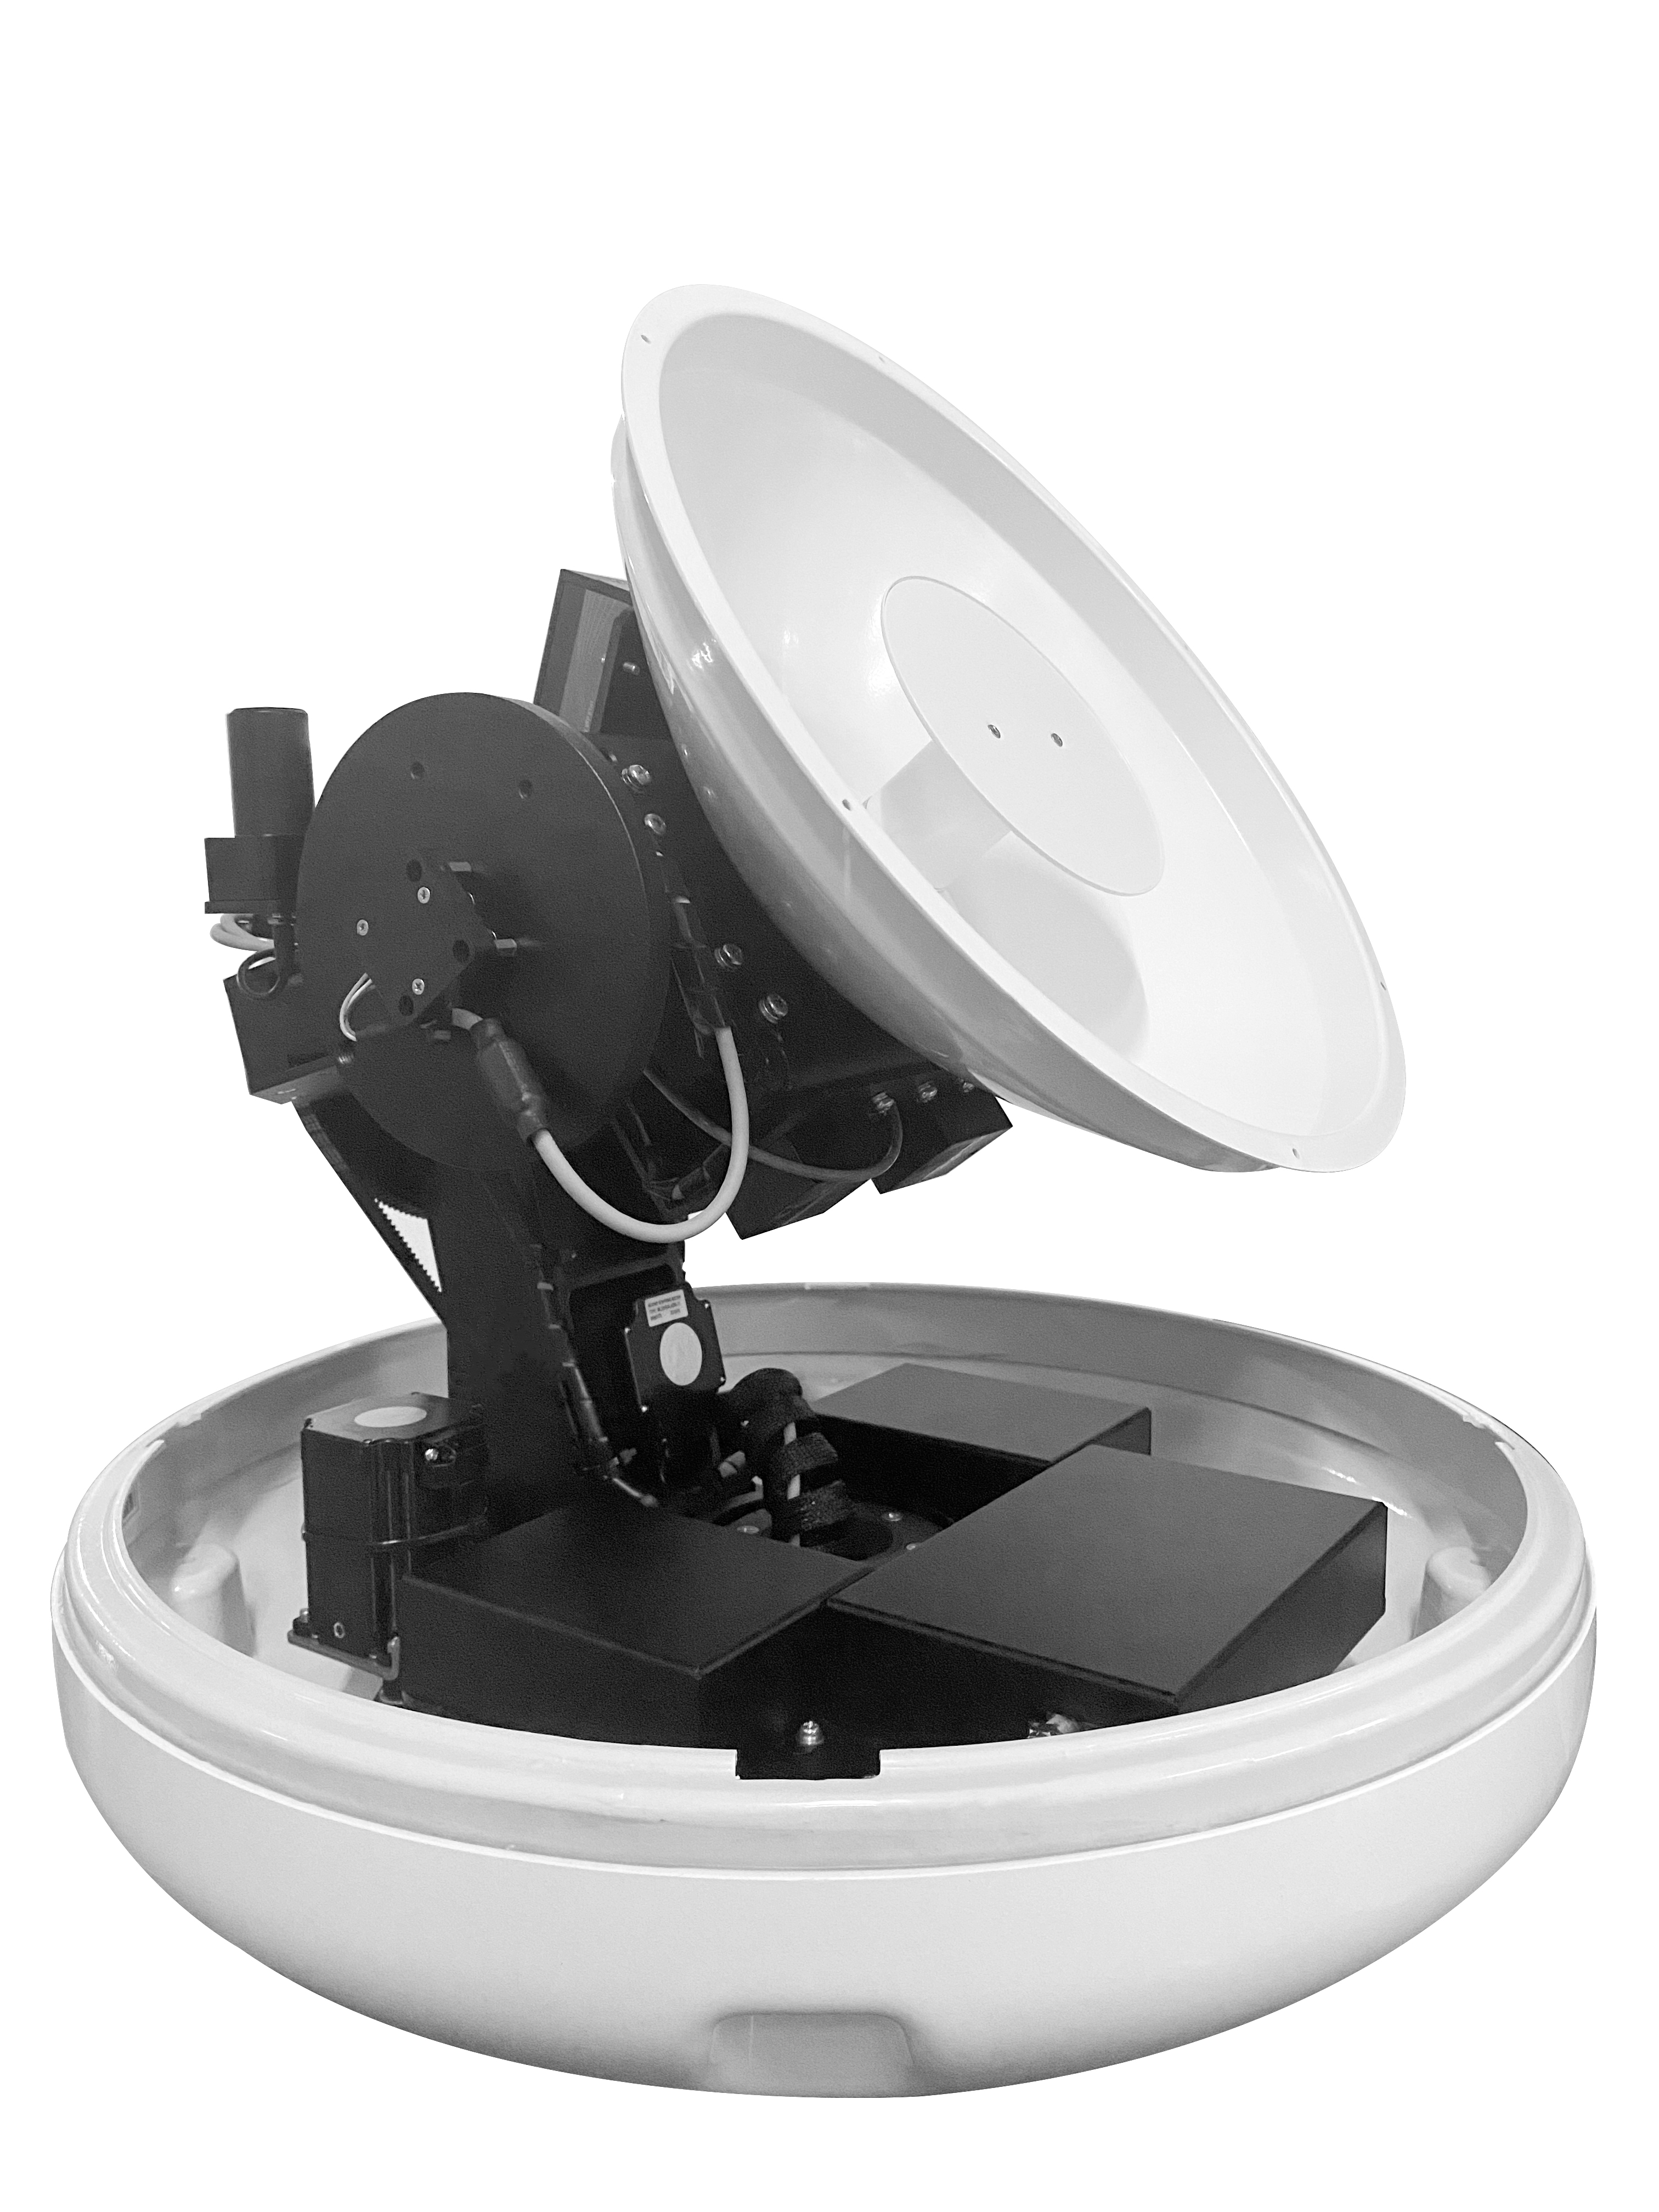 36cm Dish Diameter，High Gain Parabolic Antenna with 3-Axis mechanical design，Point to Point Tracking